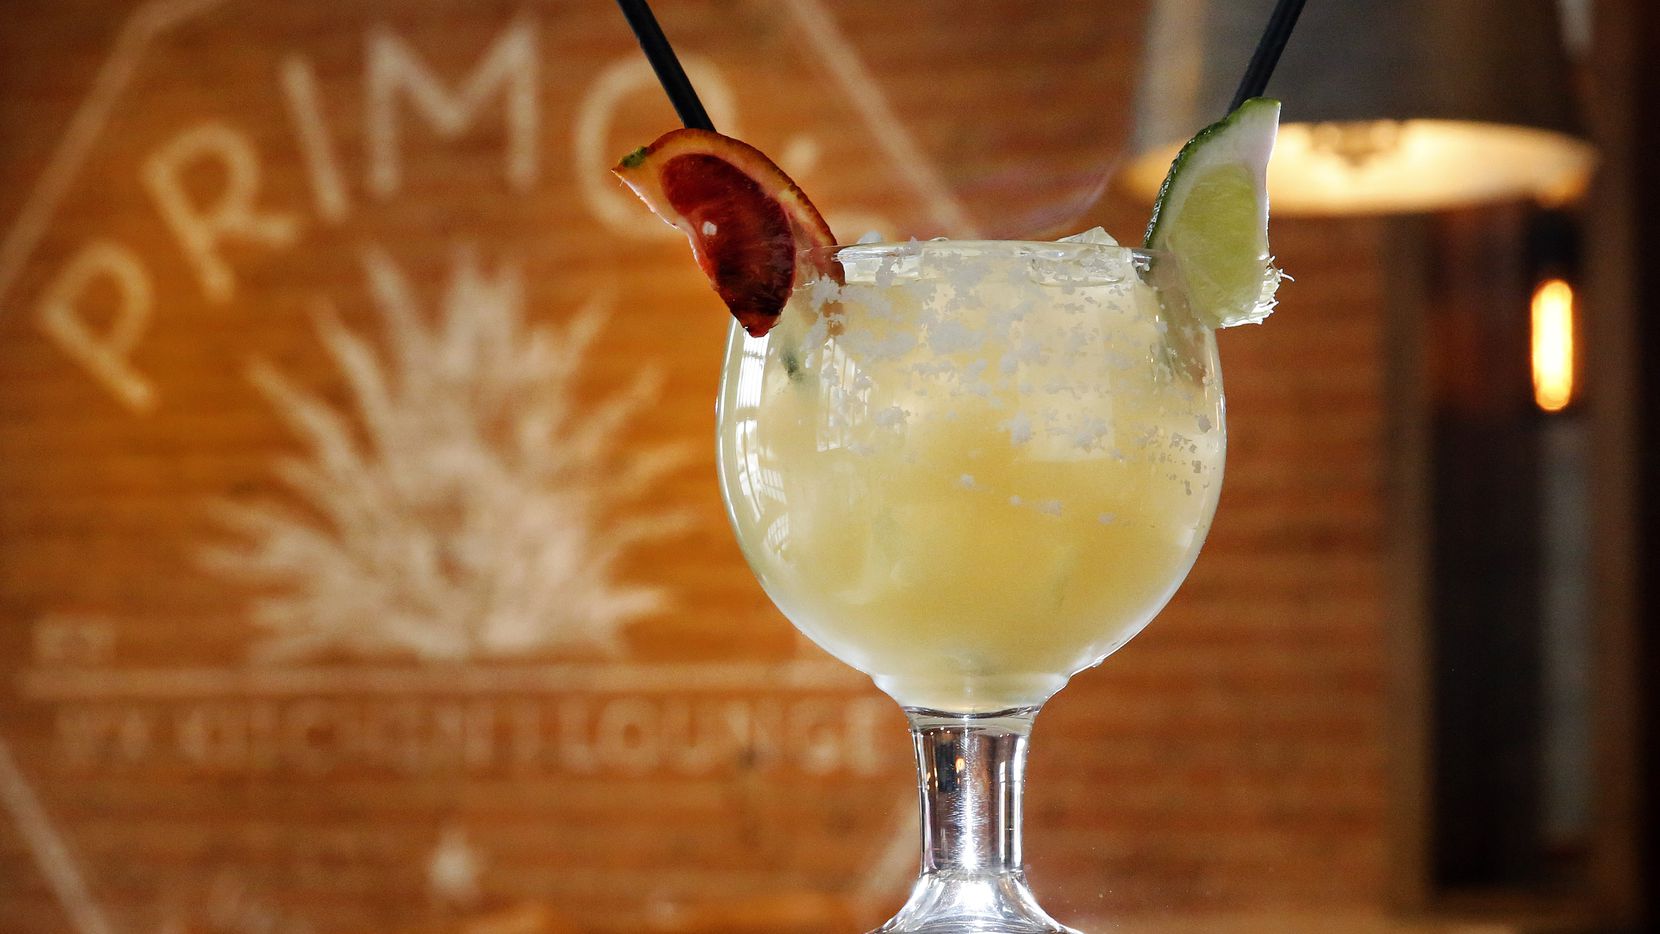 Your first question: What's the plan for margaritas at Primo's MX Kitchen & Lounge? Primo's...